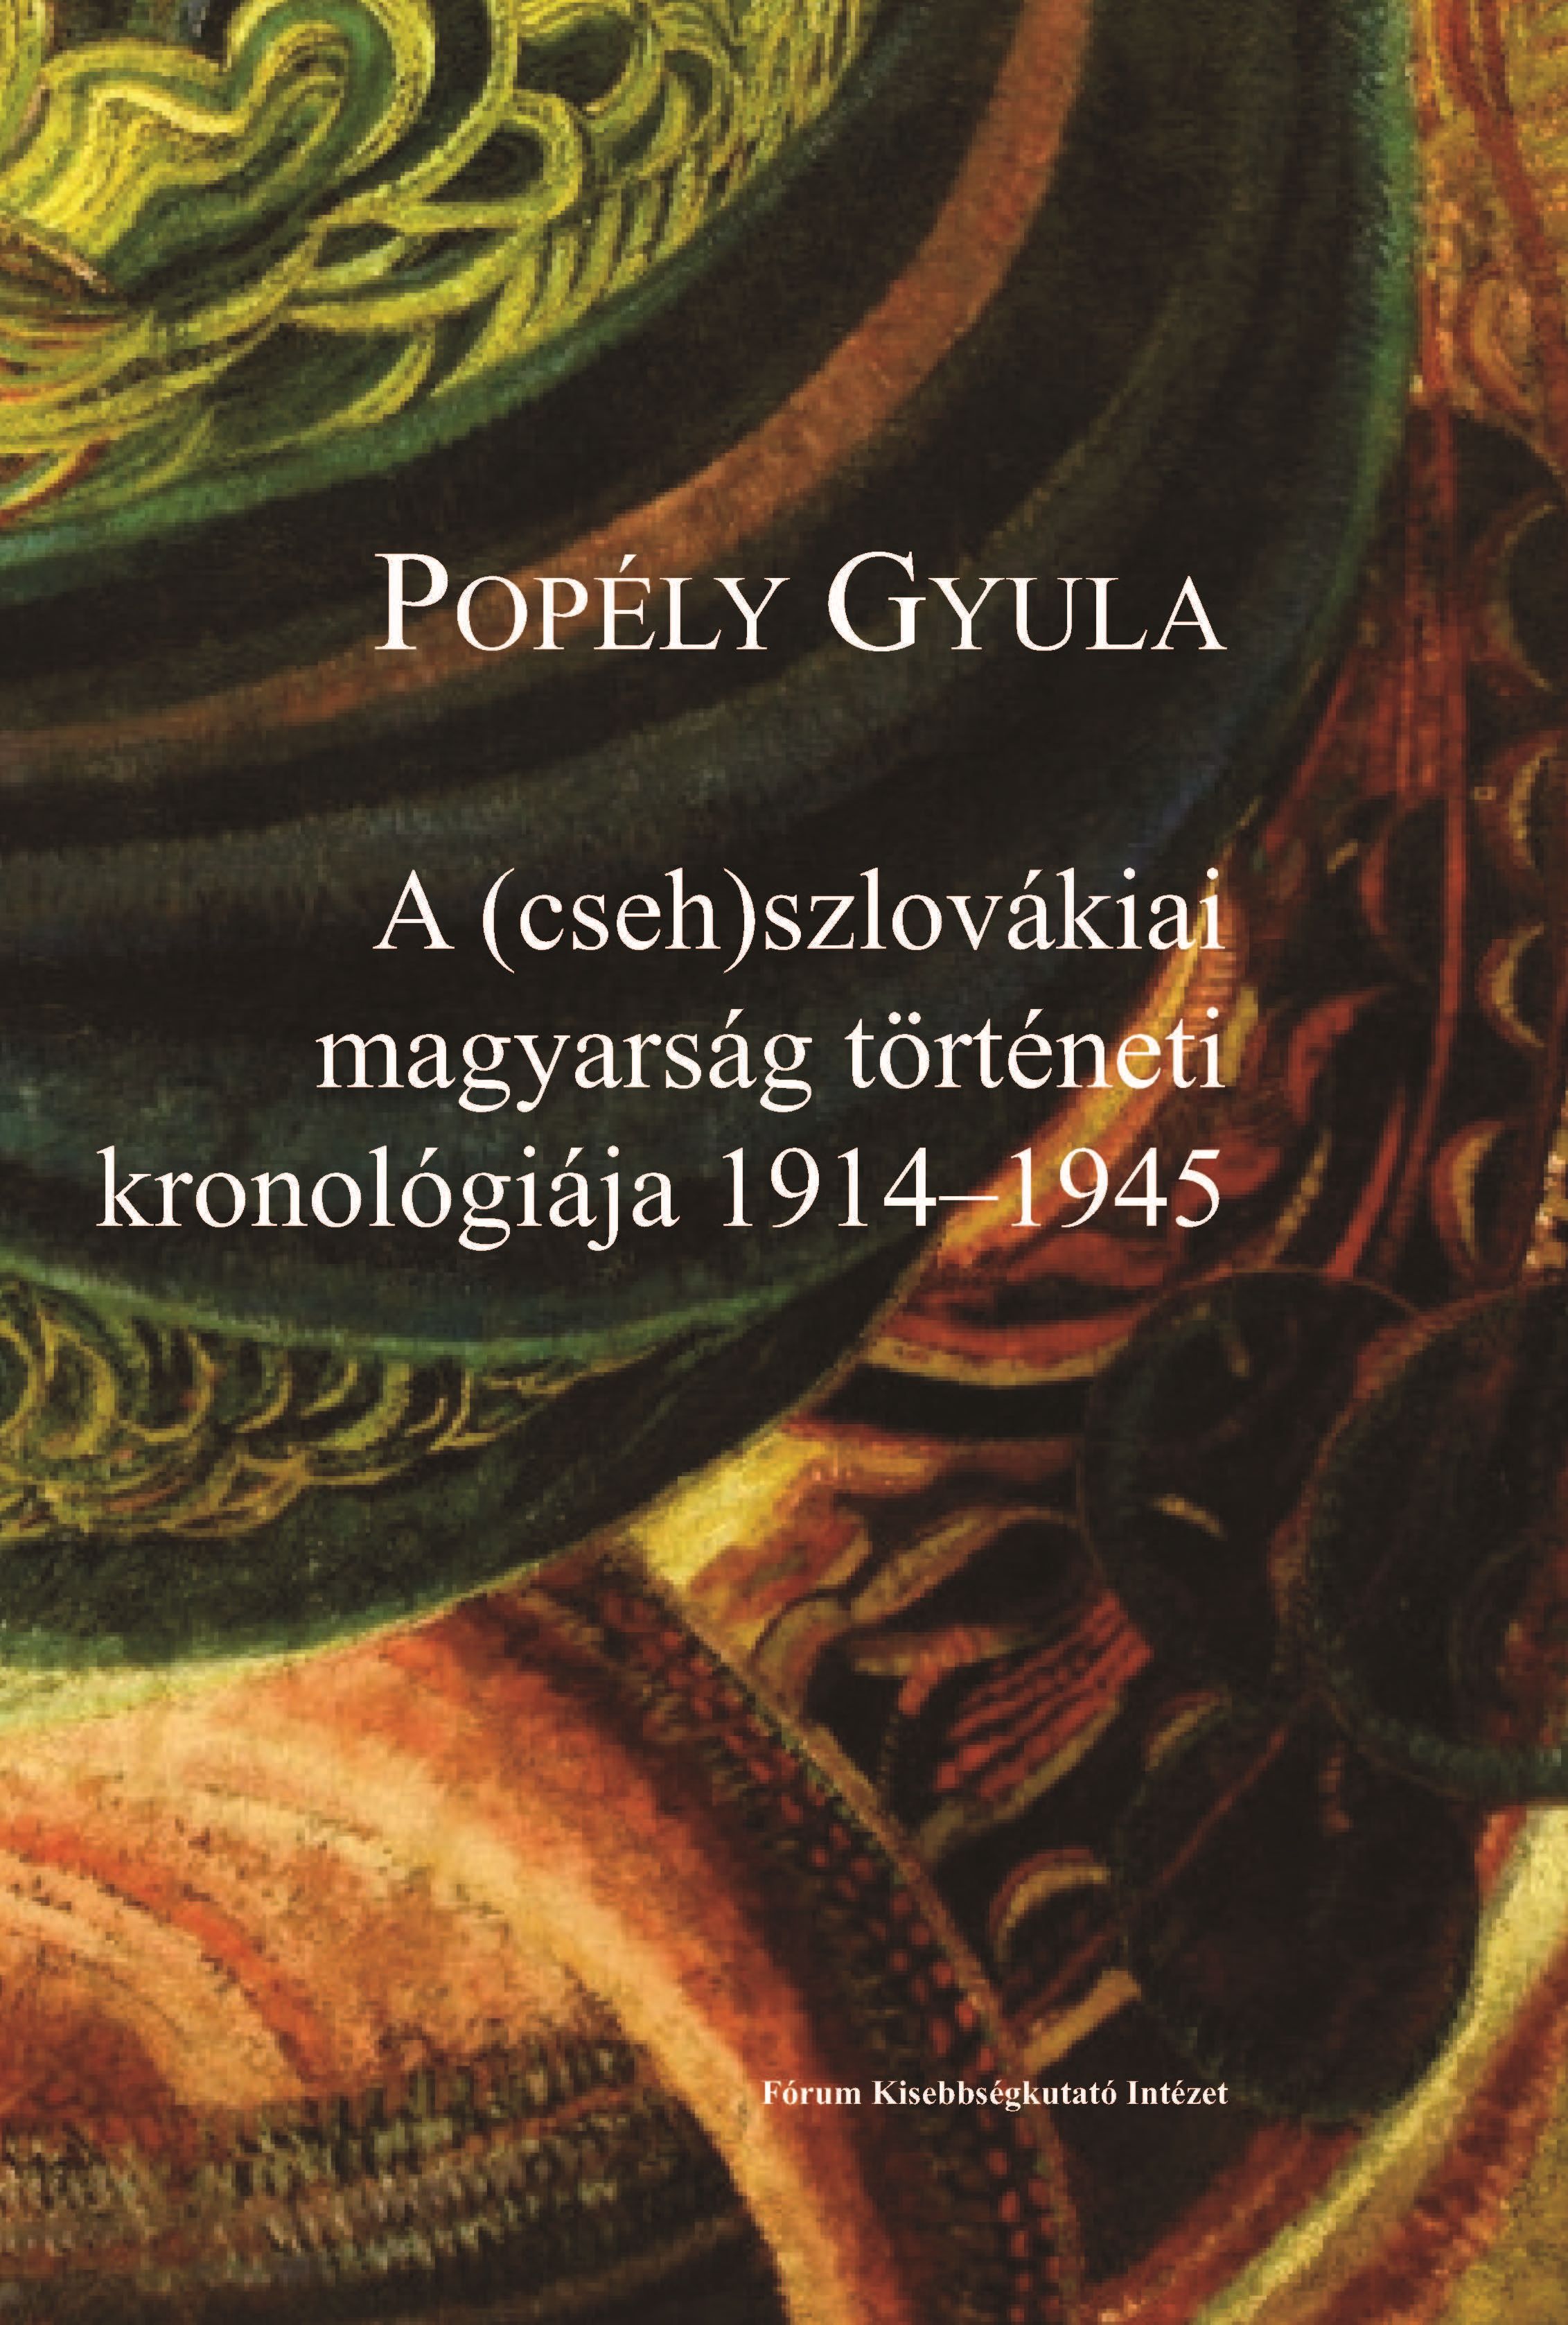 The Historical Chronology of Hungarians in (Czecho)Slovakia in the Period of 1914–1945 Cover Image